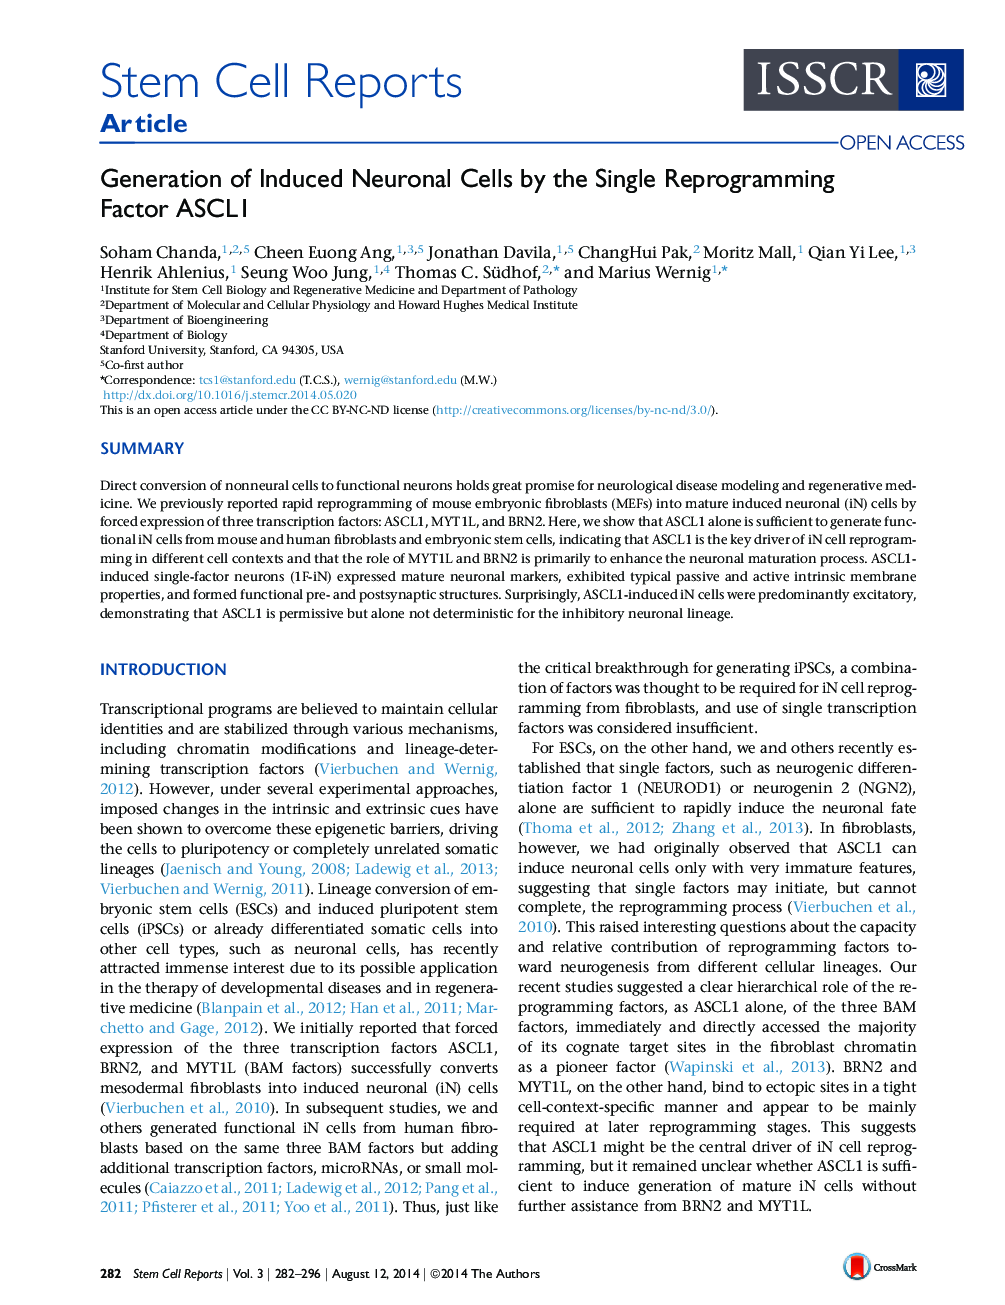 Generation of Induced Neuronal Cells by the Single Reprogramming Factor ASCL1 